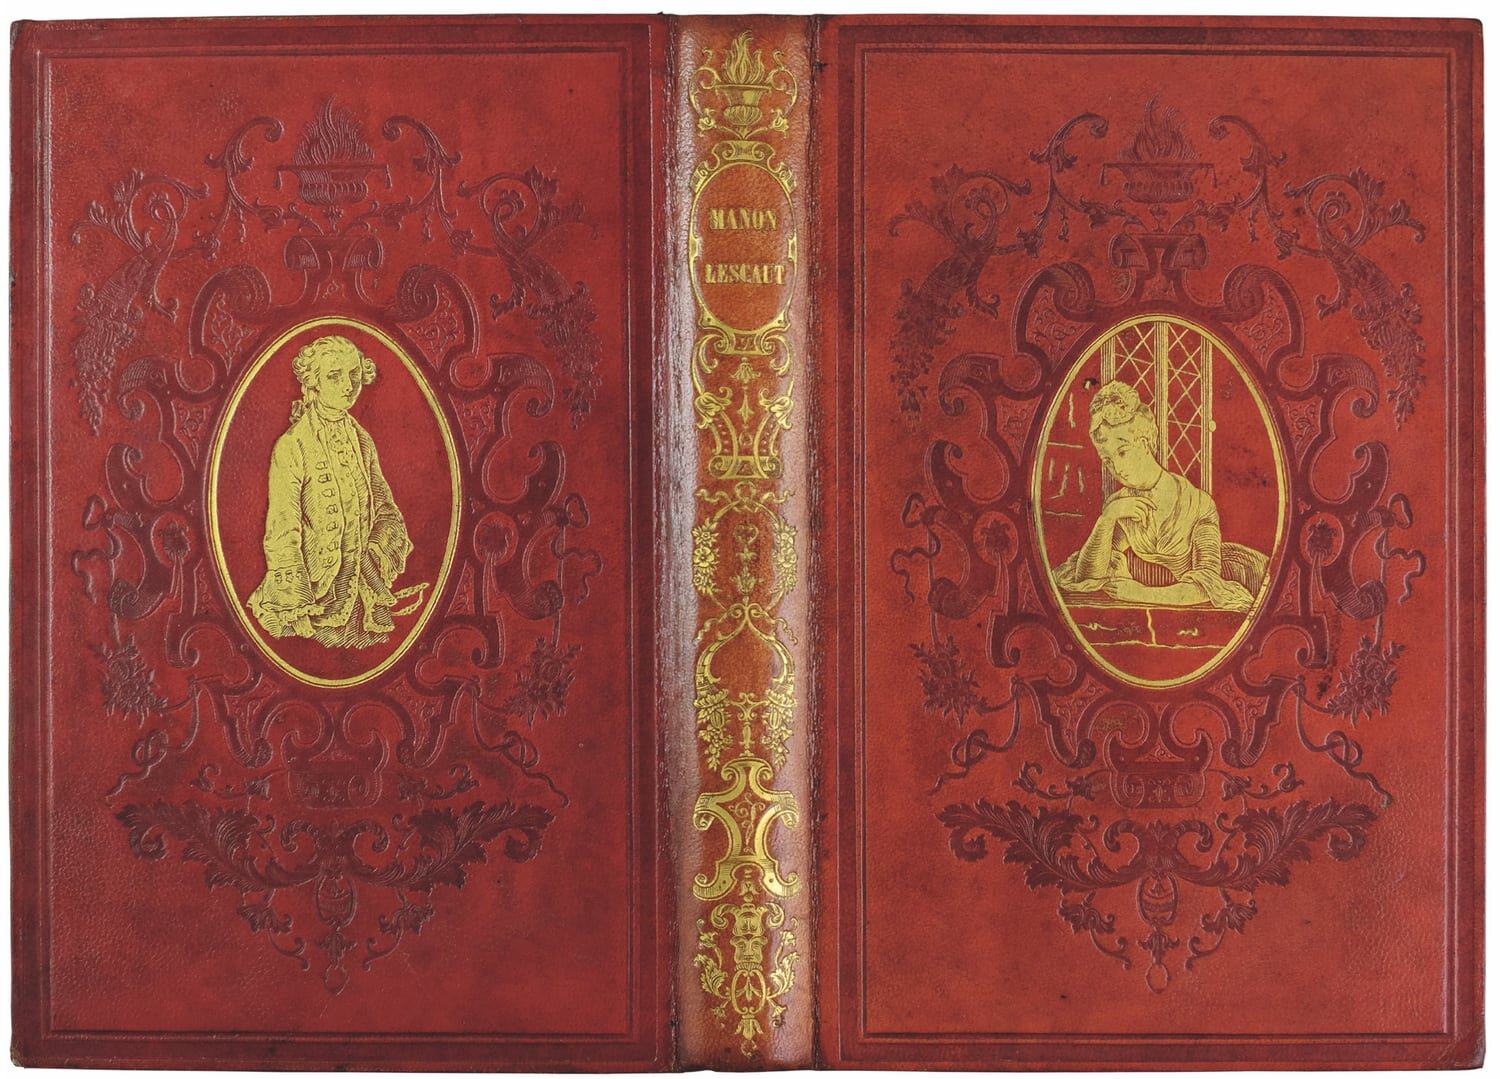   Manon Lescaut  in two examples of its publisher’s binding by Boutigny; in red and green morocco [nos. 511 and 512] 